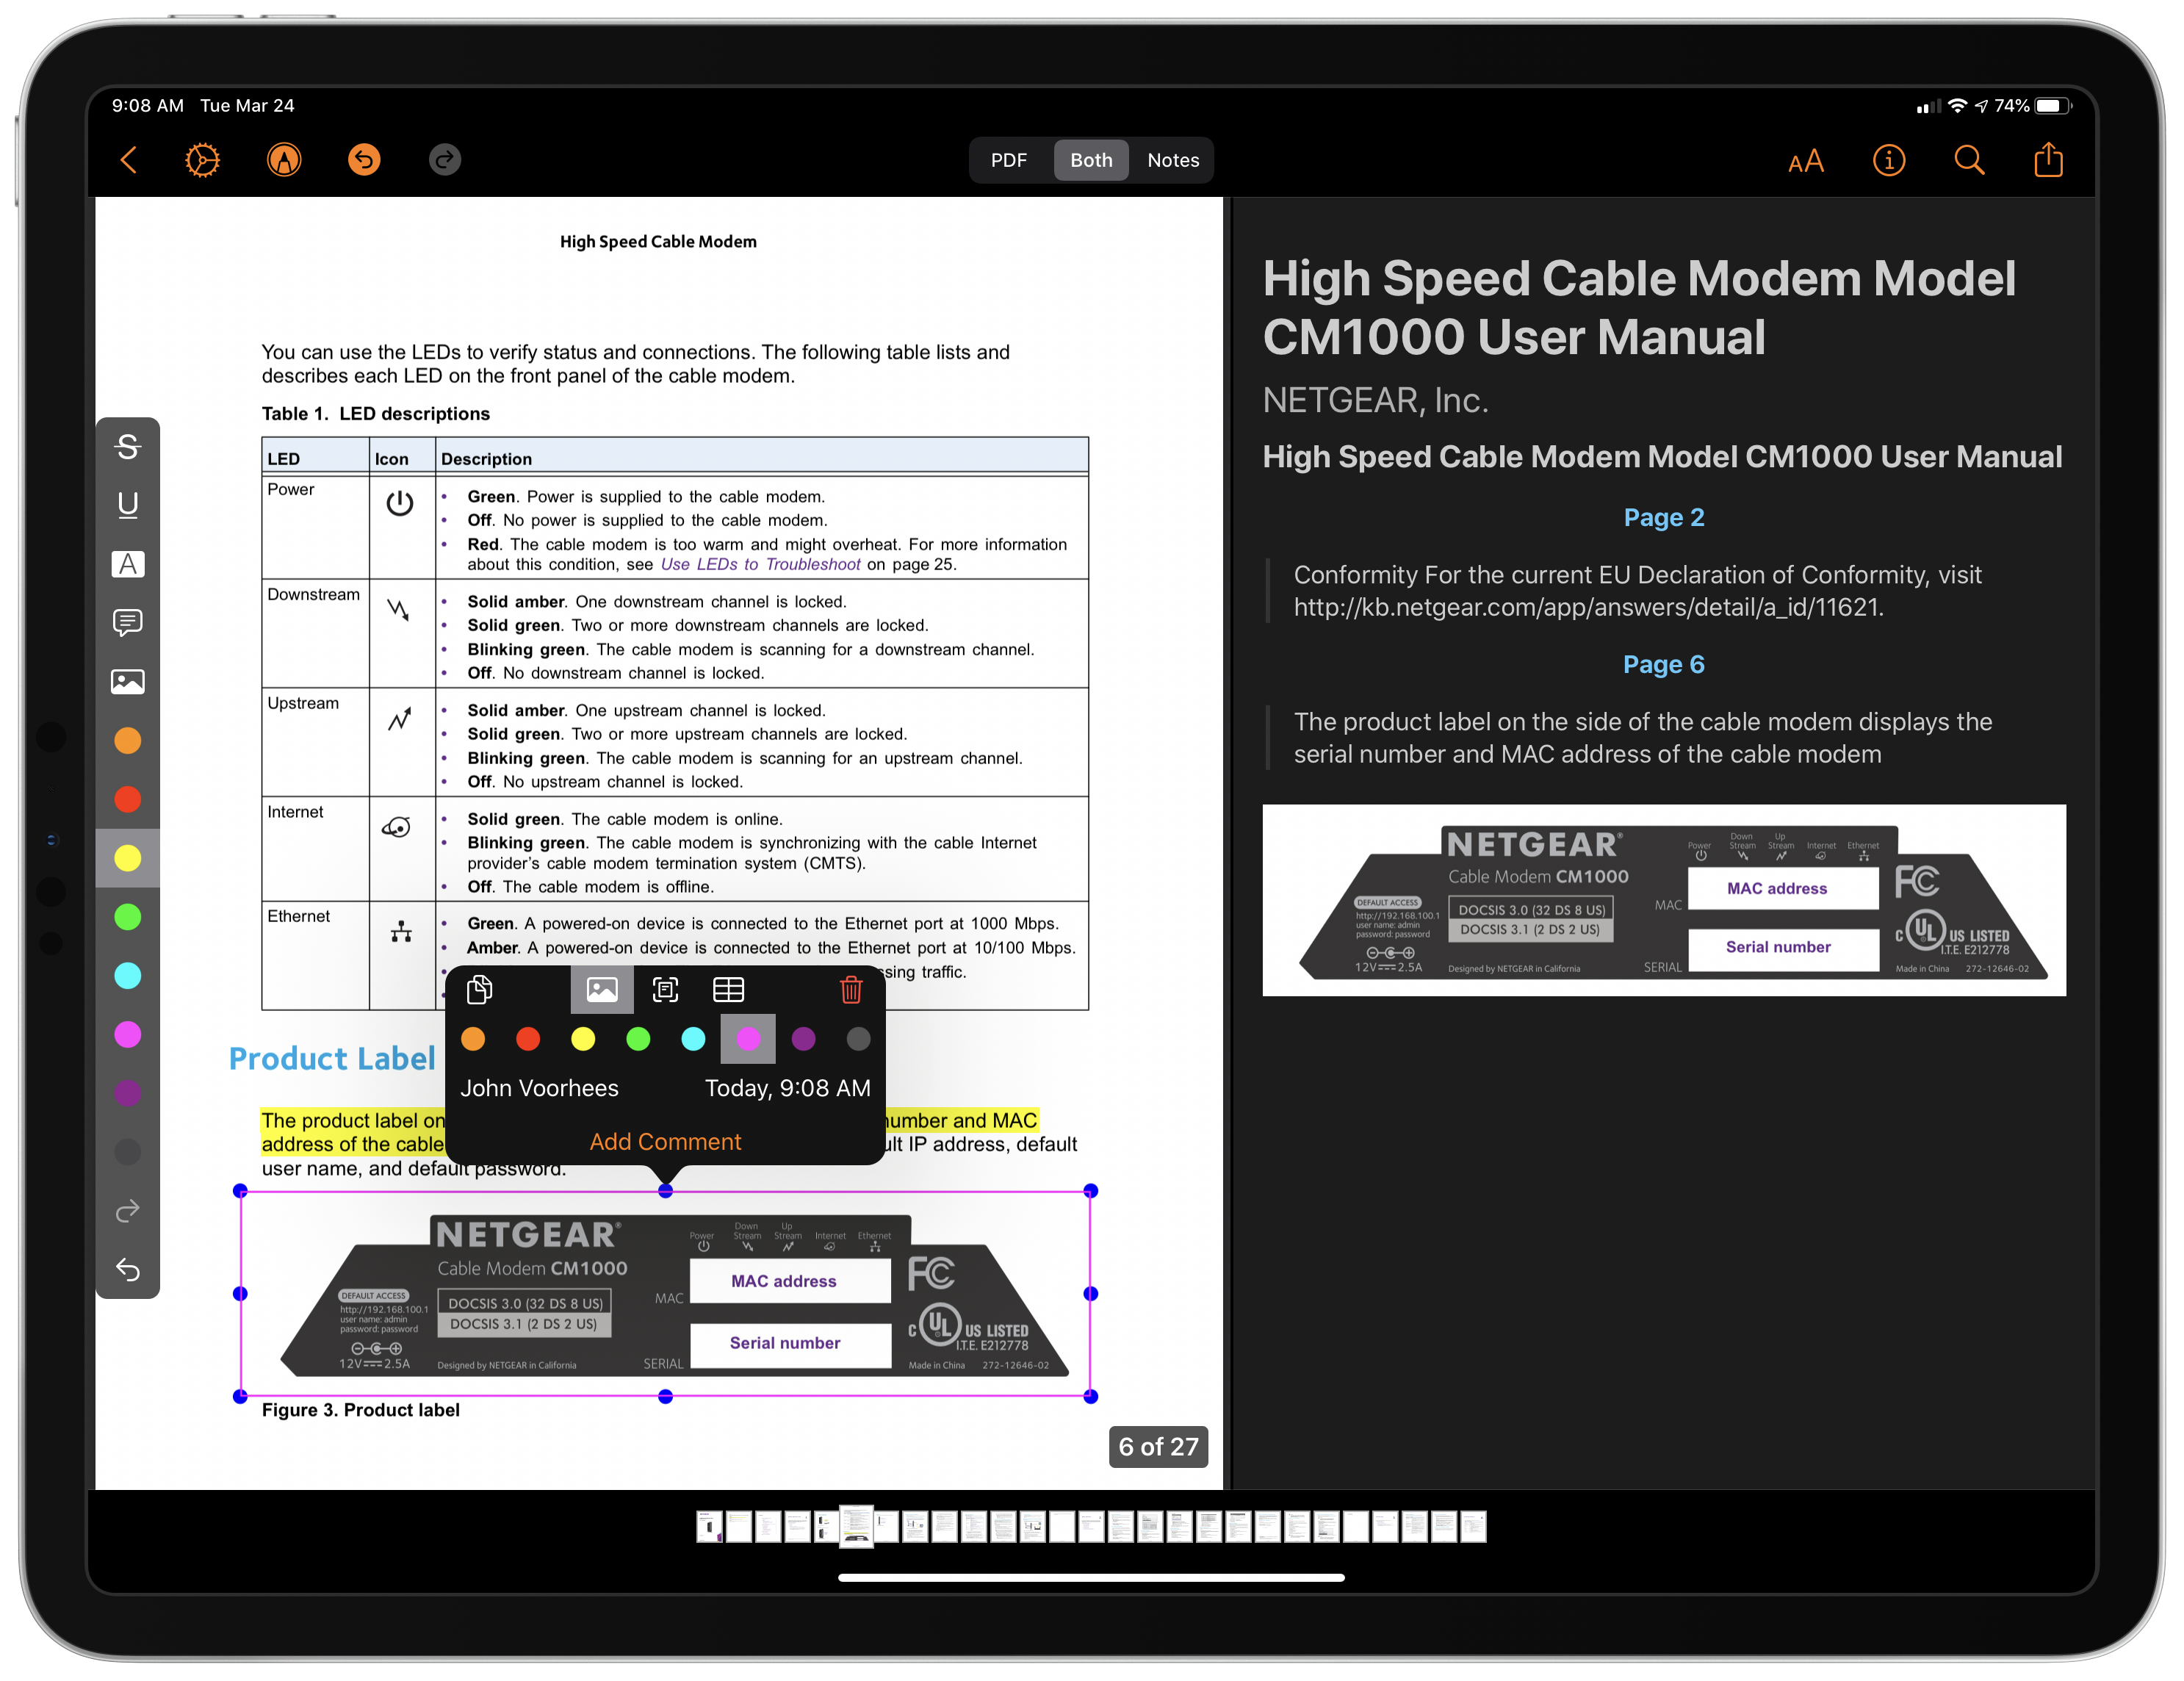 Annotations are highly customizable.